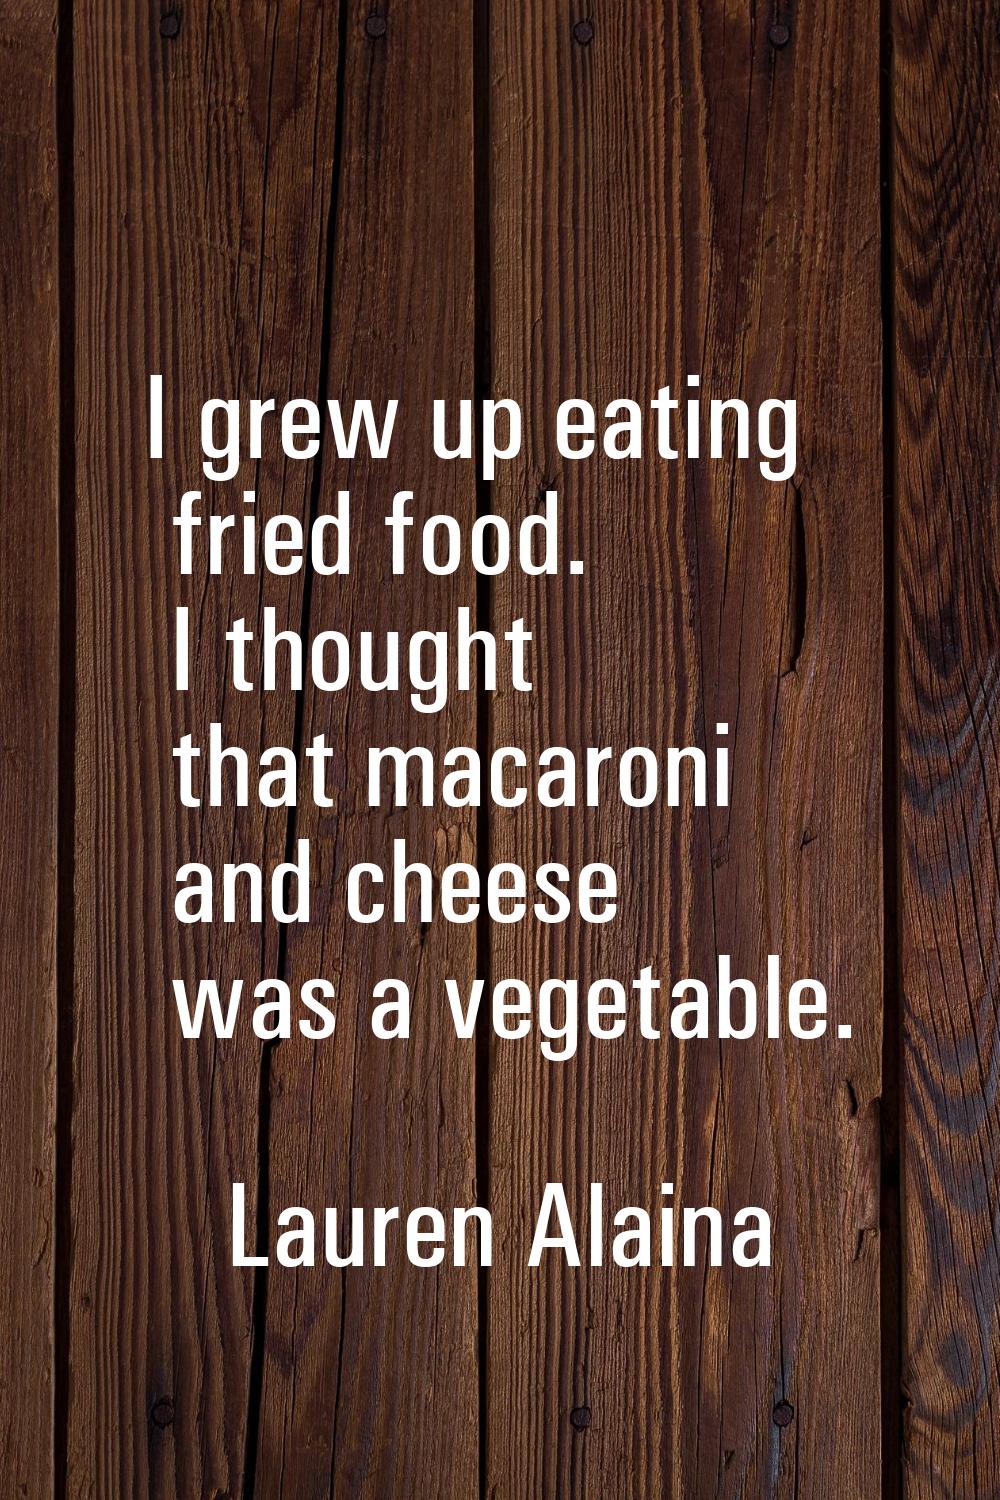 I grew up eating fried food. I thought that macaroni and cheese was a vegetable.